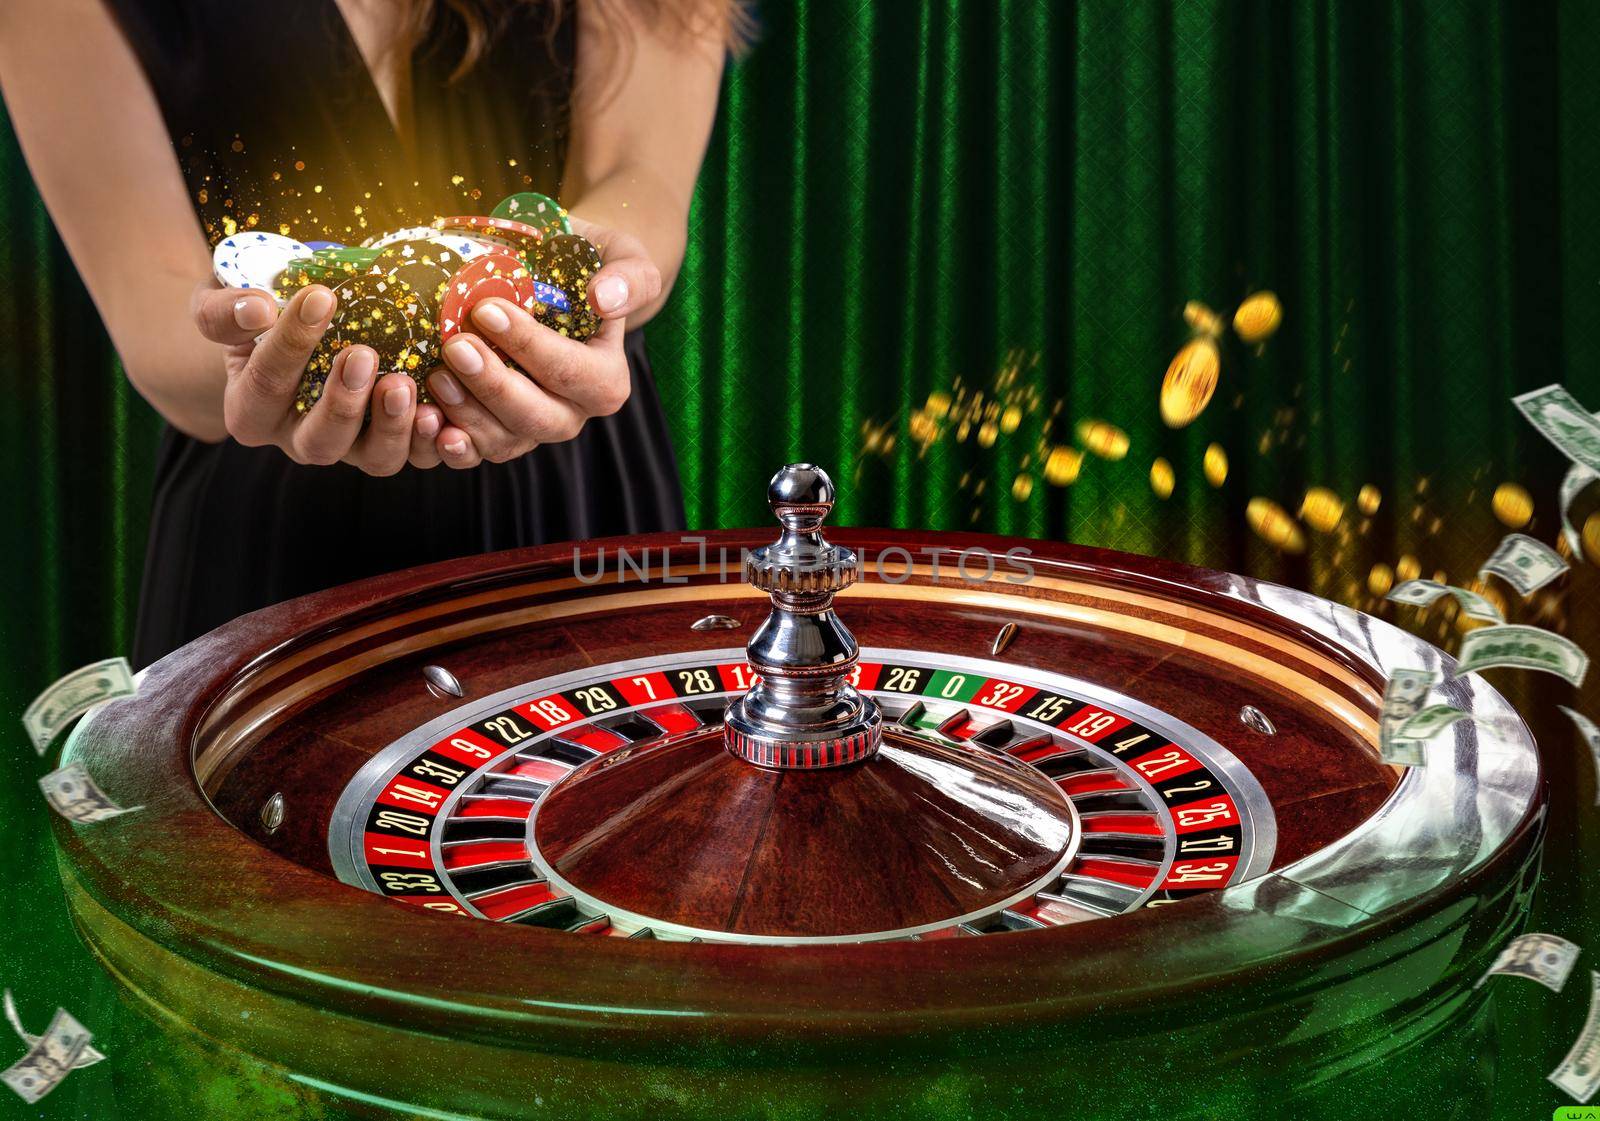 Collage of casino images with a close-up vibrant image of multicolored casino roulette table with poker chips in woman hands. by nazarovsergey